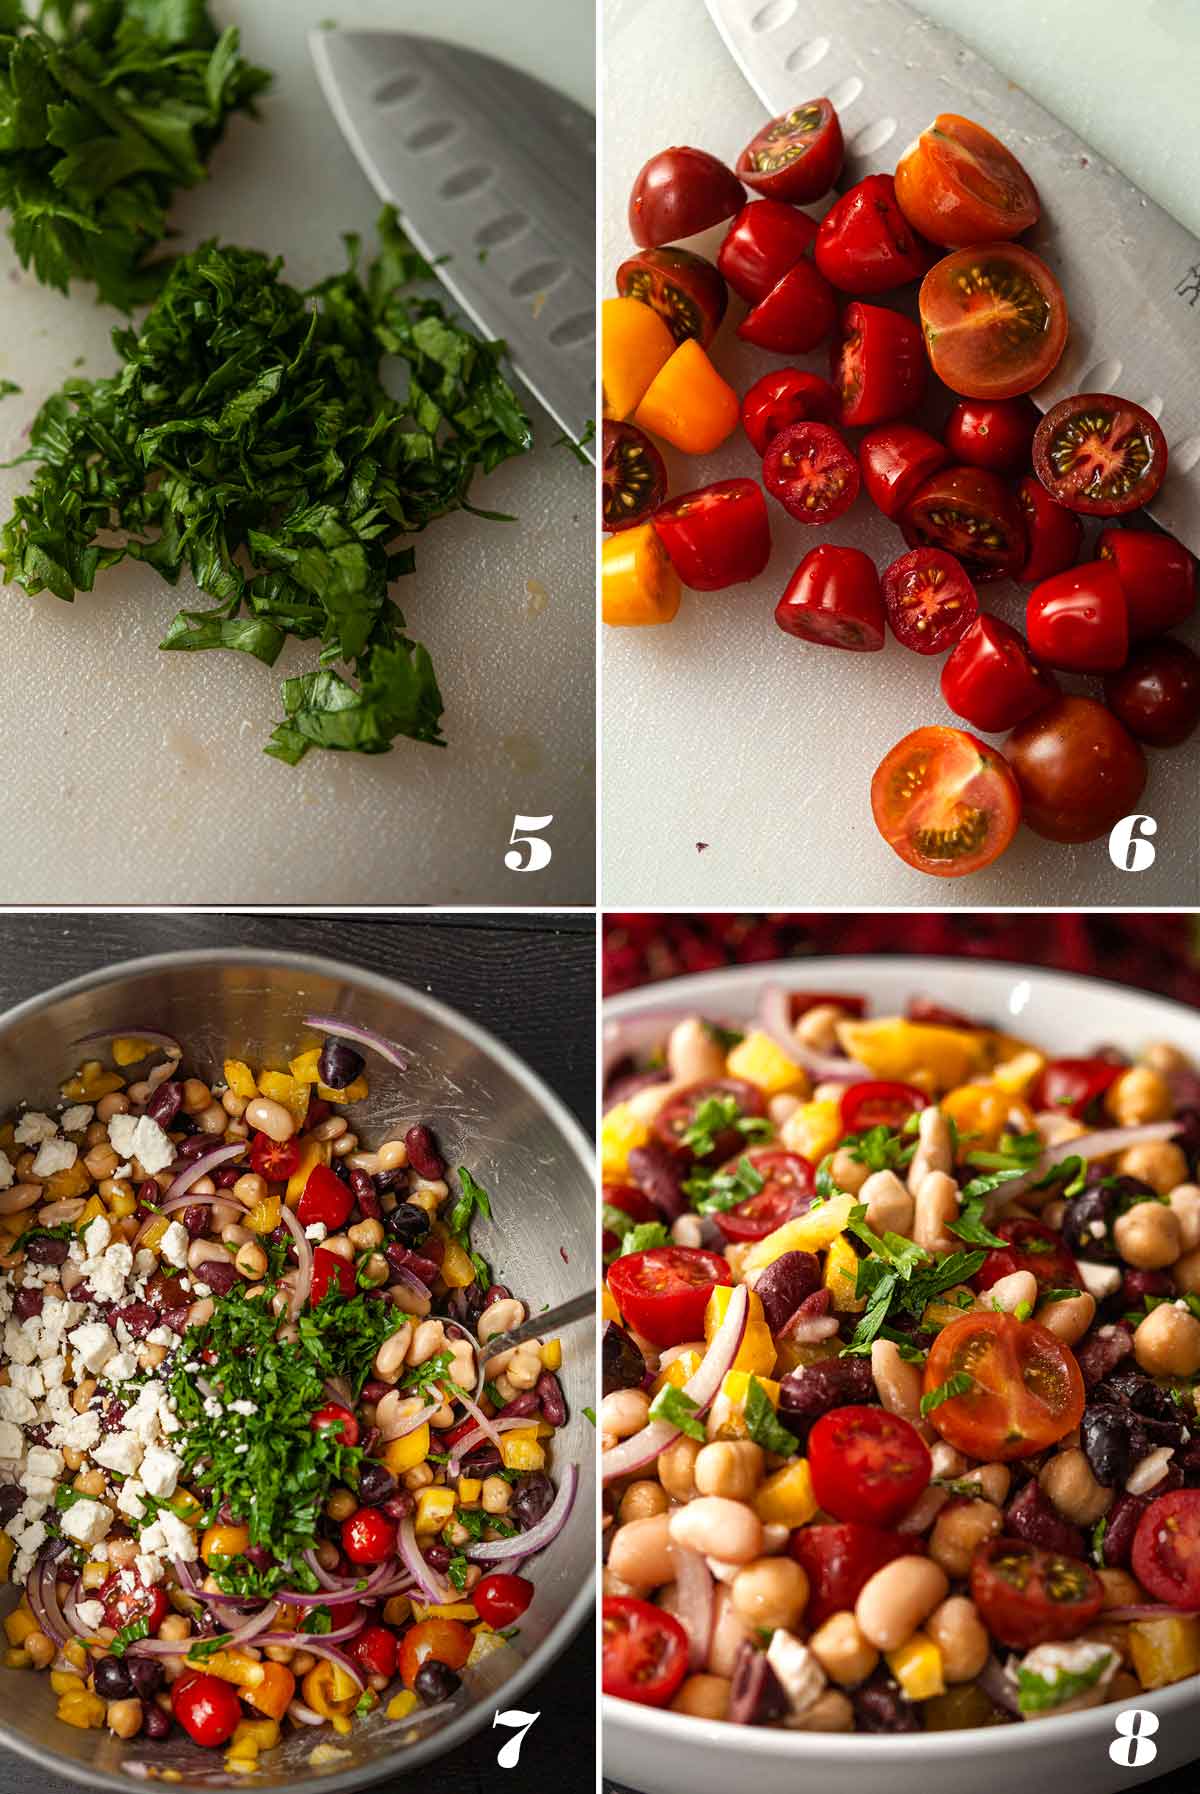 A collage of 4 numbered images showing how to prep ingredients and mix them.